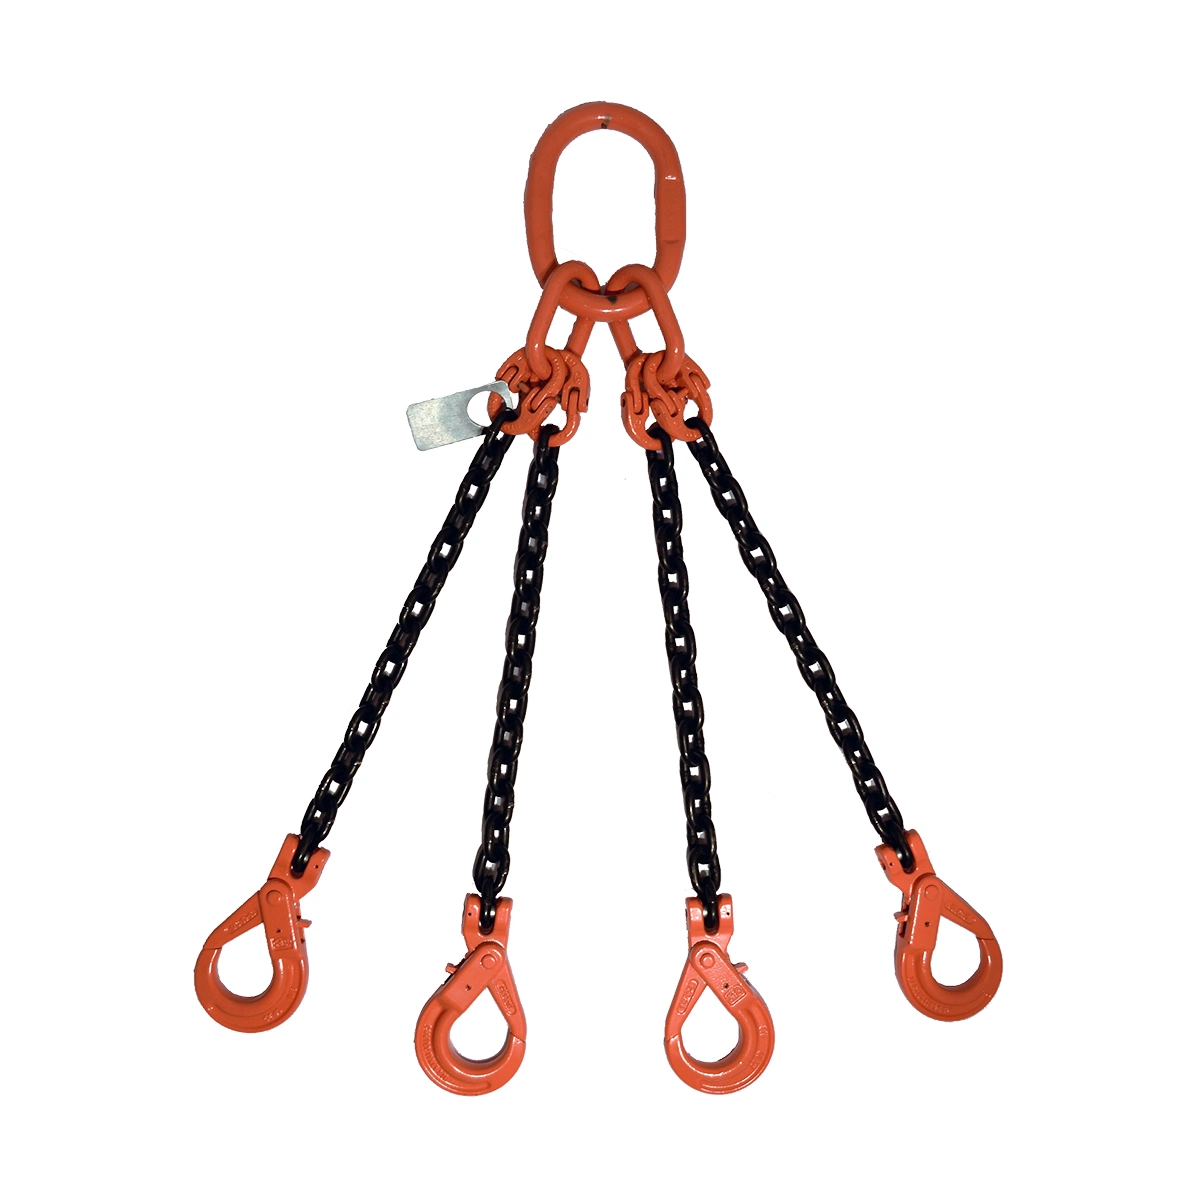 Four Double Legs Rigging Lofting